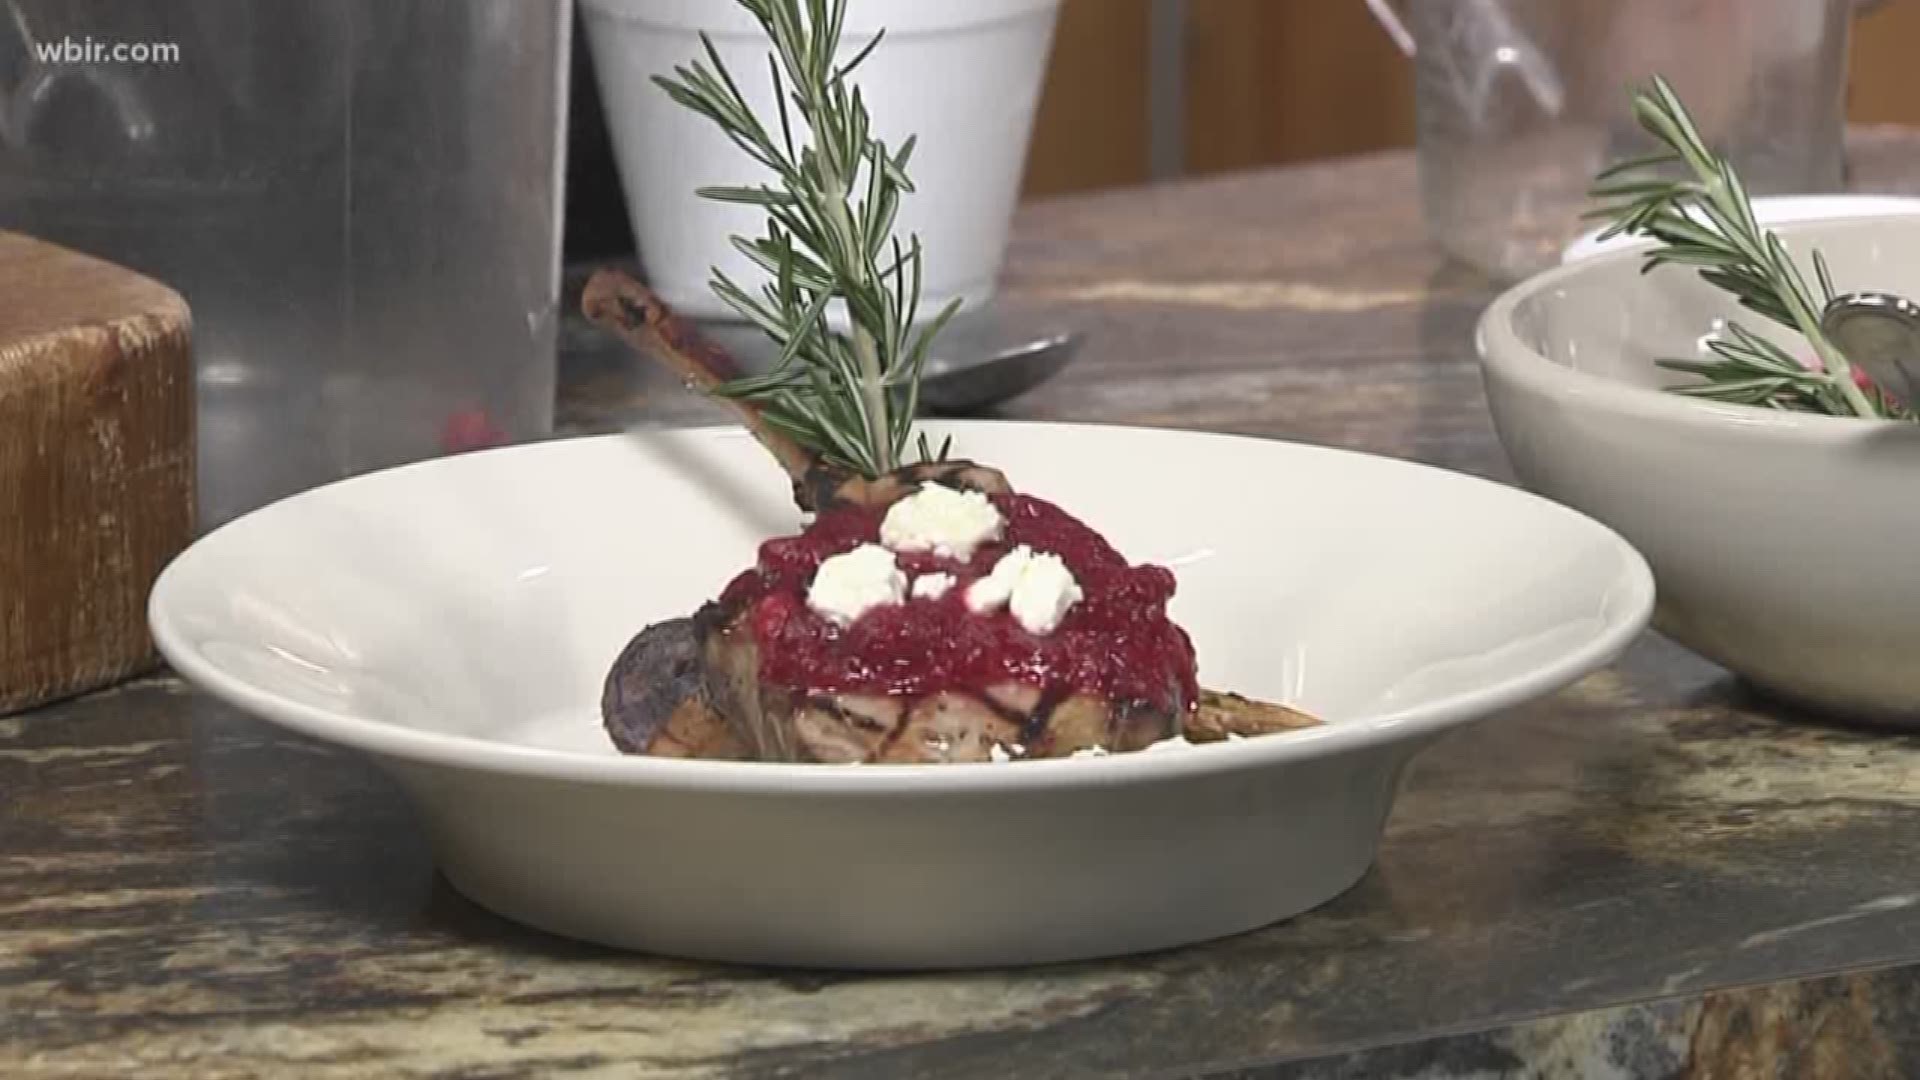 Chef Frank from Cappuccino's joins us in the kitchen with a sweet pork recipe - pork chop with cranberry orange chutney.